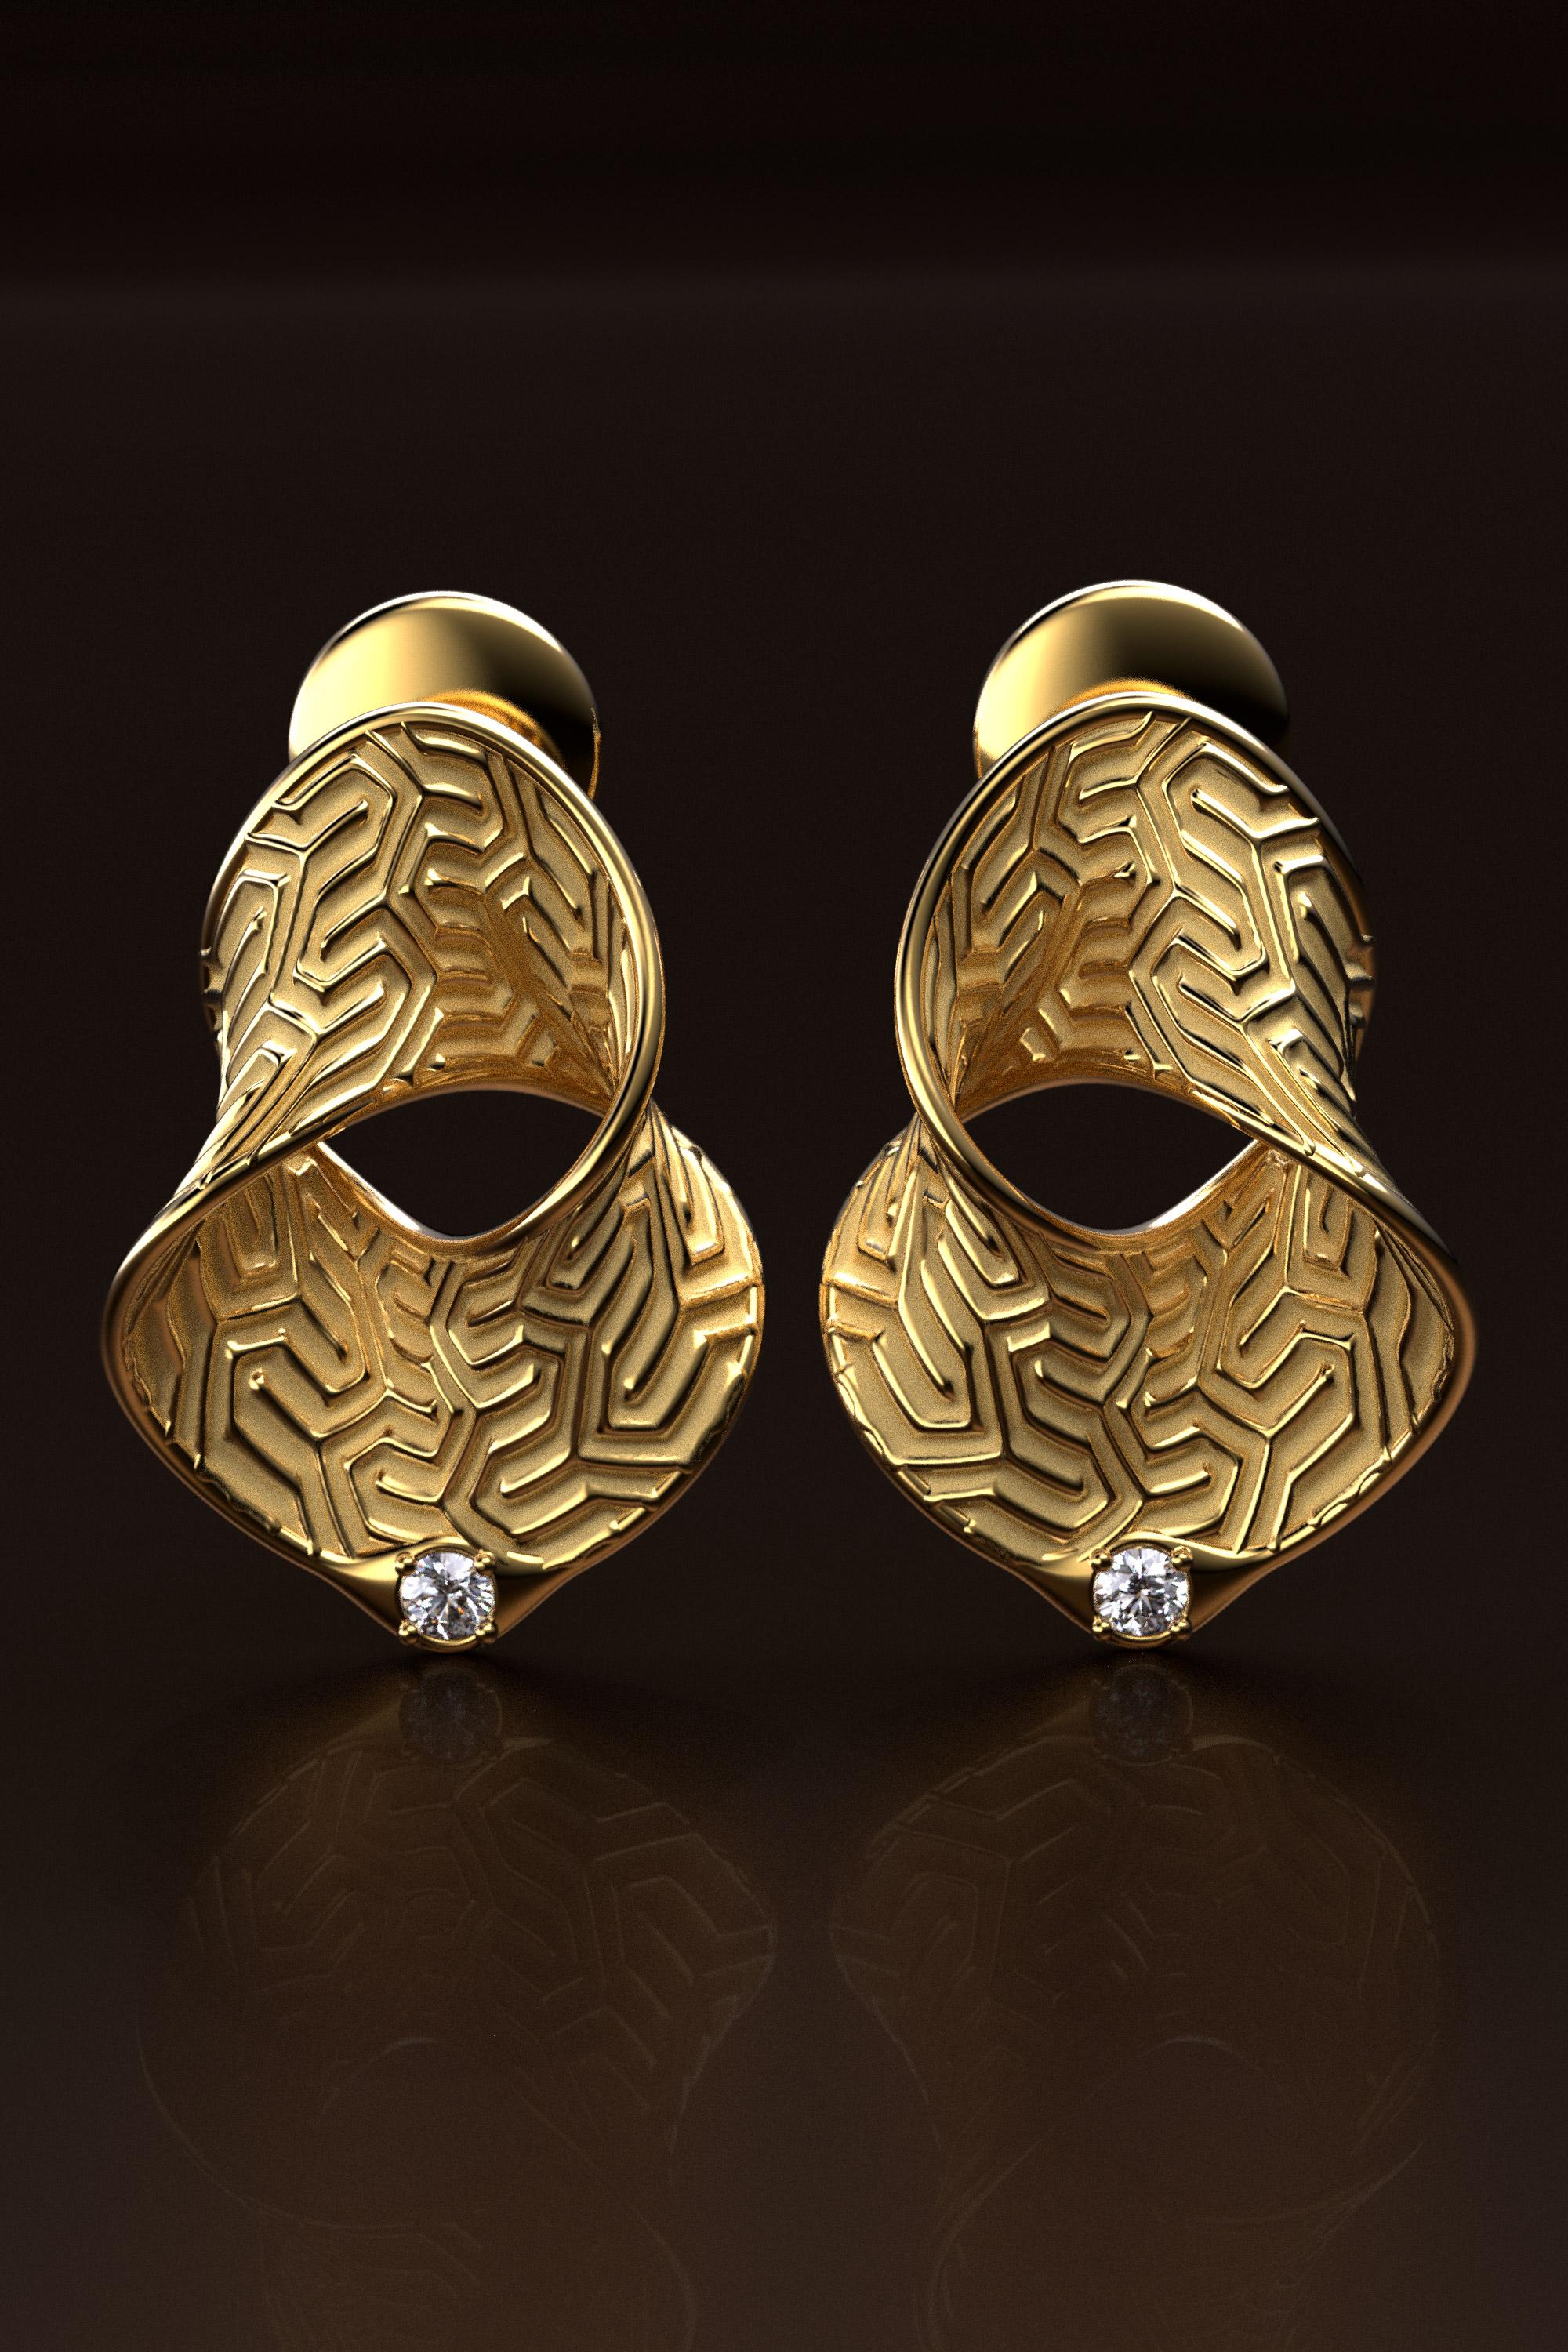 Made to order 18k Gold Earrings.
Modern and symmetrical statement Gold Earrings with natural diamonds.
The jewels of the Polvere collection are born from a material idea in which modern and fluid surfaces are covered with gold dust, play with the